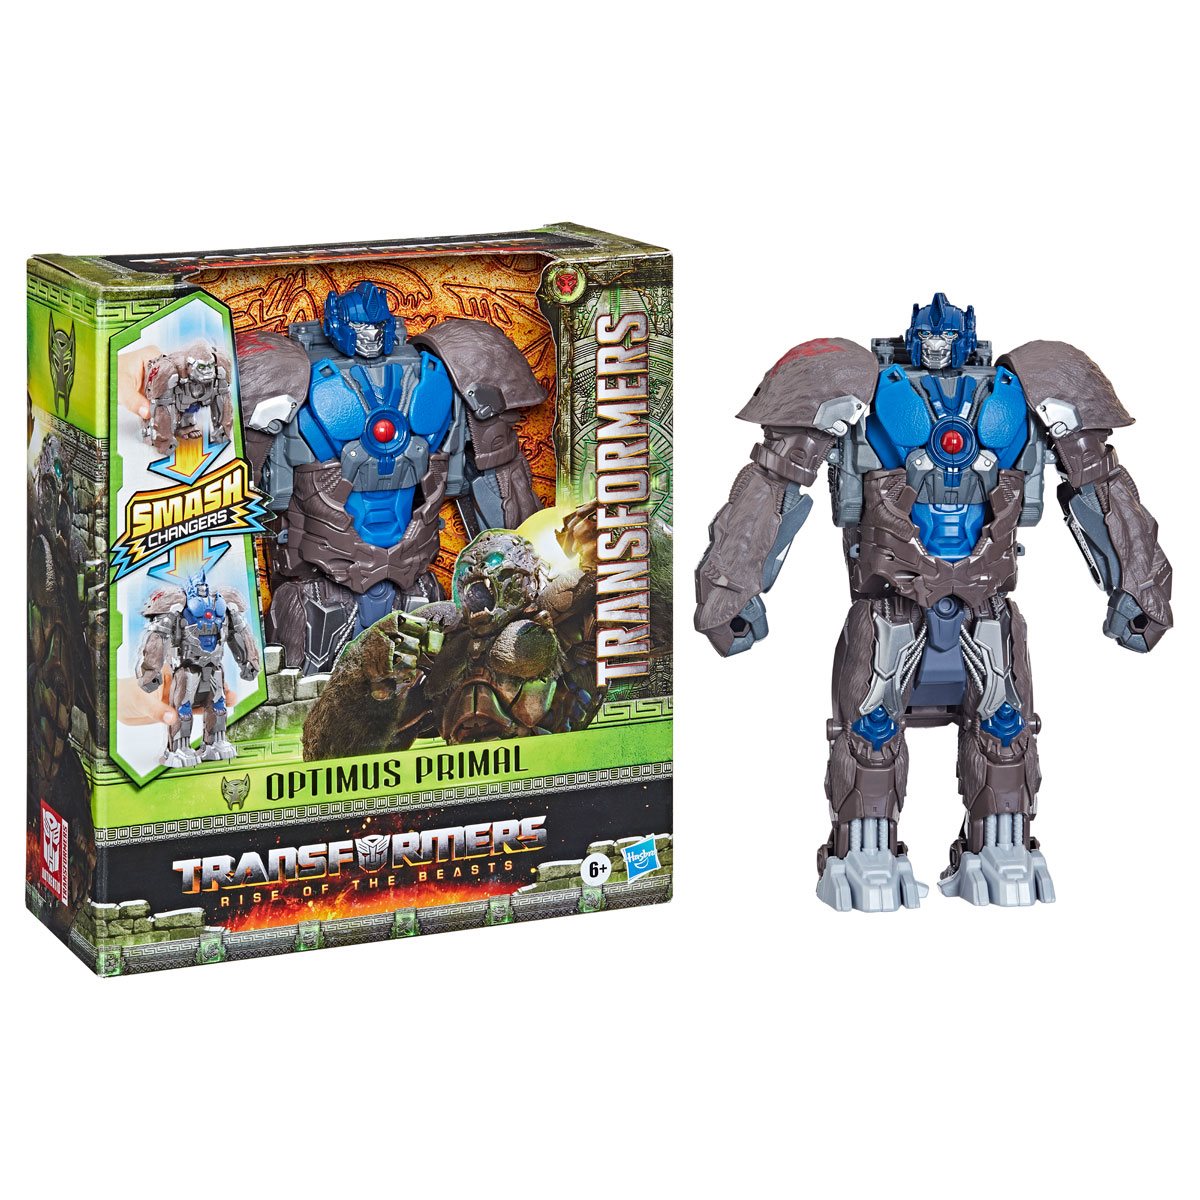 Transformers Rise of the Beasts Optimus Primal Smash Changers 9-Inch Action Figure Toy - Heretoserveyou